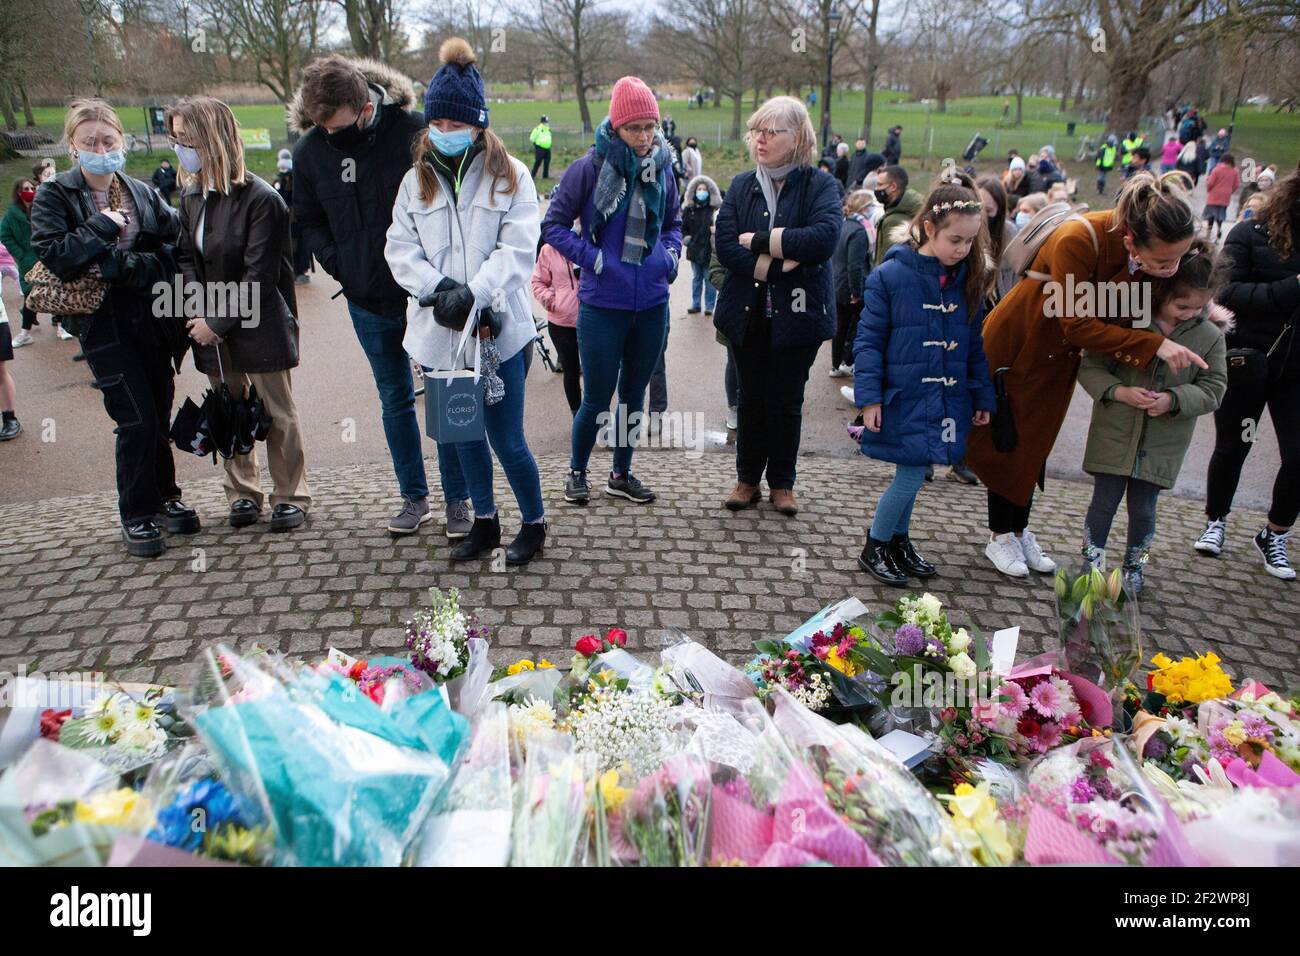 London, UK, 13 March 2021: A memorial of flowers for Sarah Everard draws hundreds of well wishers at Clapham Common bandstand. Tributes included plants, flowers, candles and messages such as 'When Will Women be Safe?' and 'She was only walking home.' An official vigil has been cancelled due to police concerns over coronavirus. Anna Watson/Alamy Live News Stock Photo